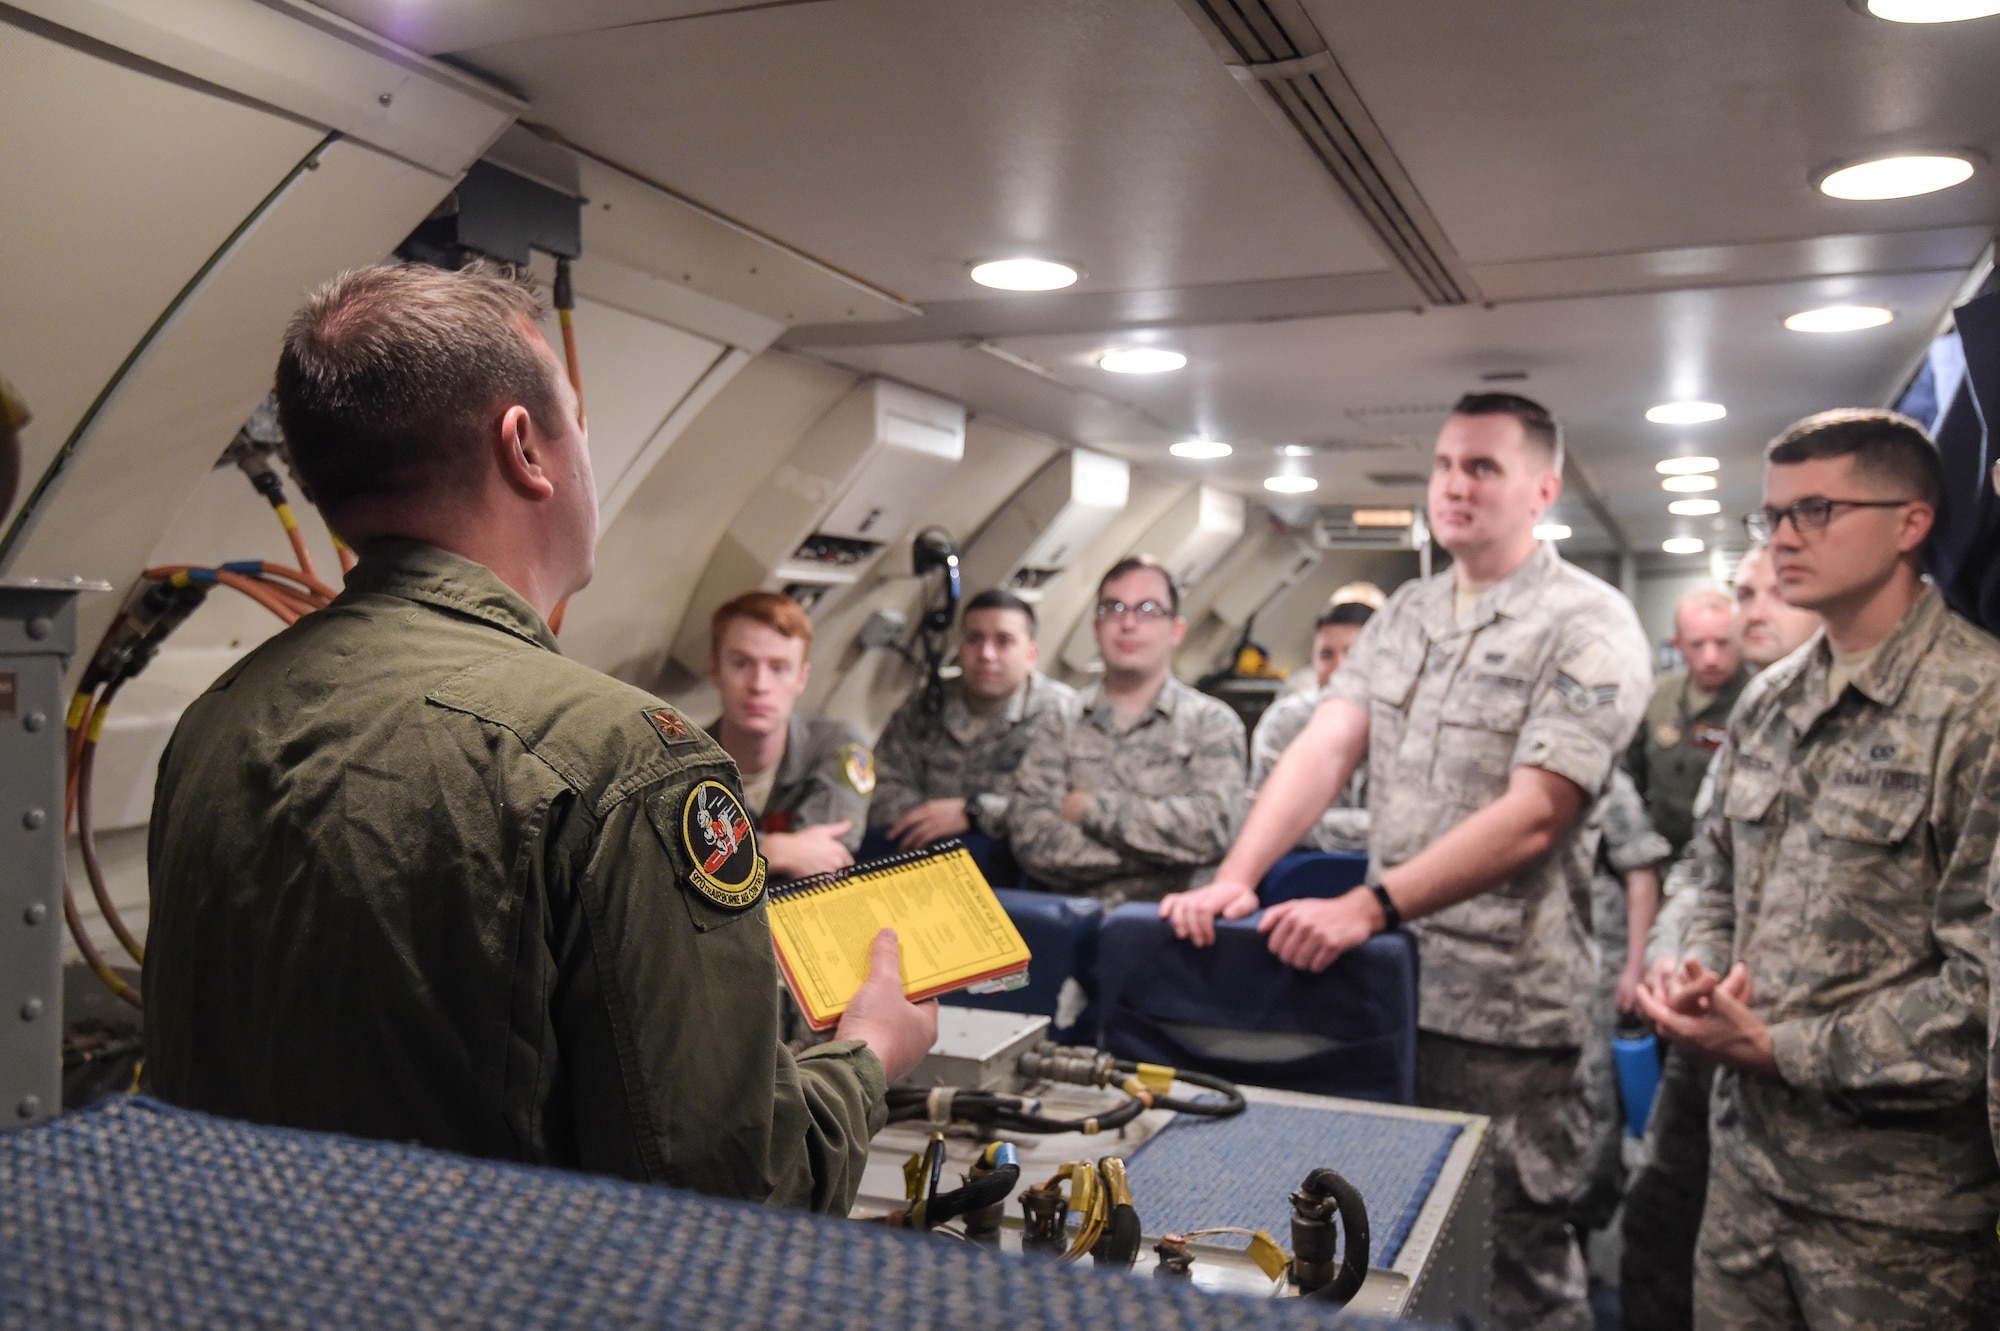 Maj. Matthew Heckman, an air battle manager assigned to the 970th Airborne Air Control Squadron, briefs Airmen assigned to Joint Base Pearl Harbor-Hickam, Hawaii, on Jan. 31 before a mission in support of Sentry Aloha. Reservists from the 513th Air Control Group deployed to the Hawaiian Islands to provide command and control for Sentry Aloha 17-01, a primarily Reserve and Air National Guard exercise that involves more than 40 aircraft and 1,000 personnel. (U.S. Air Force photo by 2nd Lt. Caleb Wanzer)